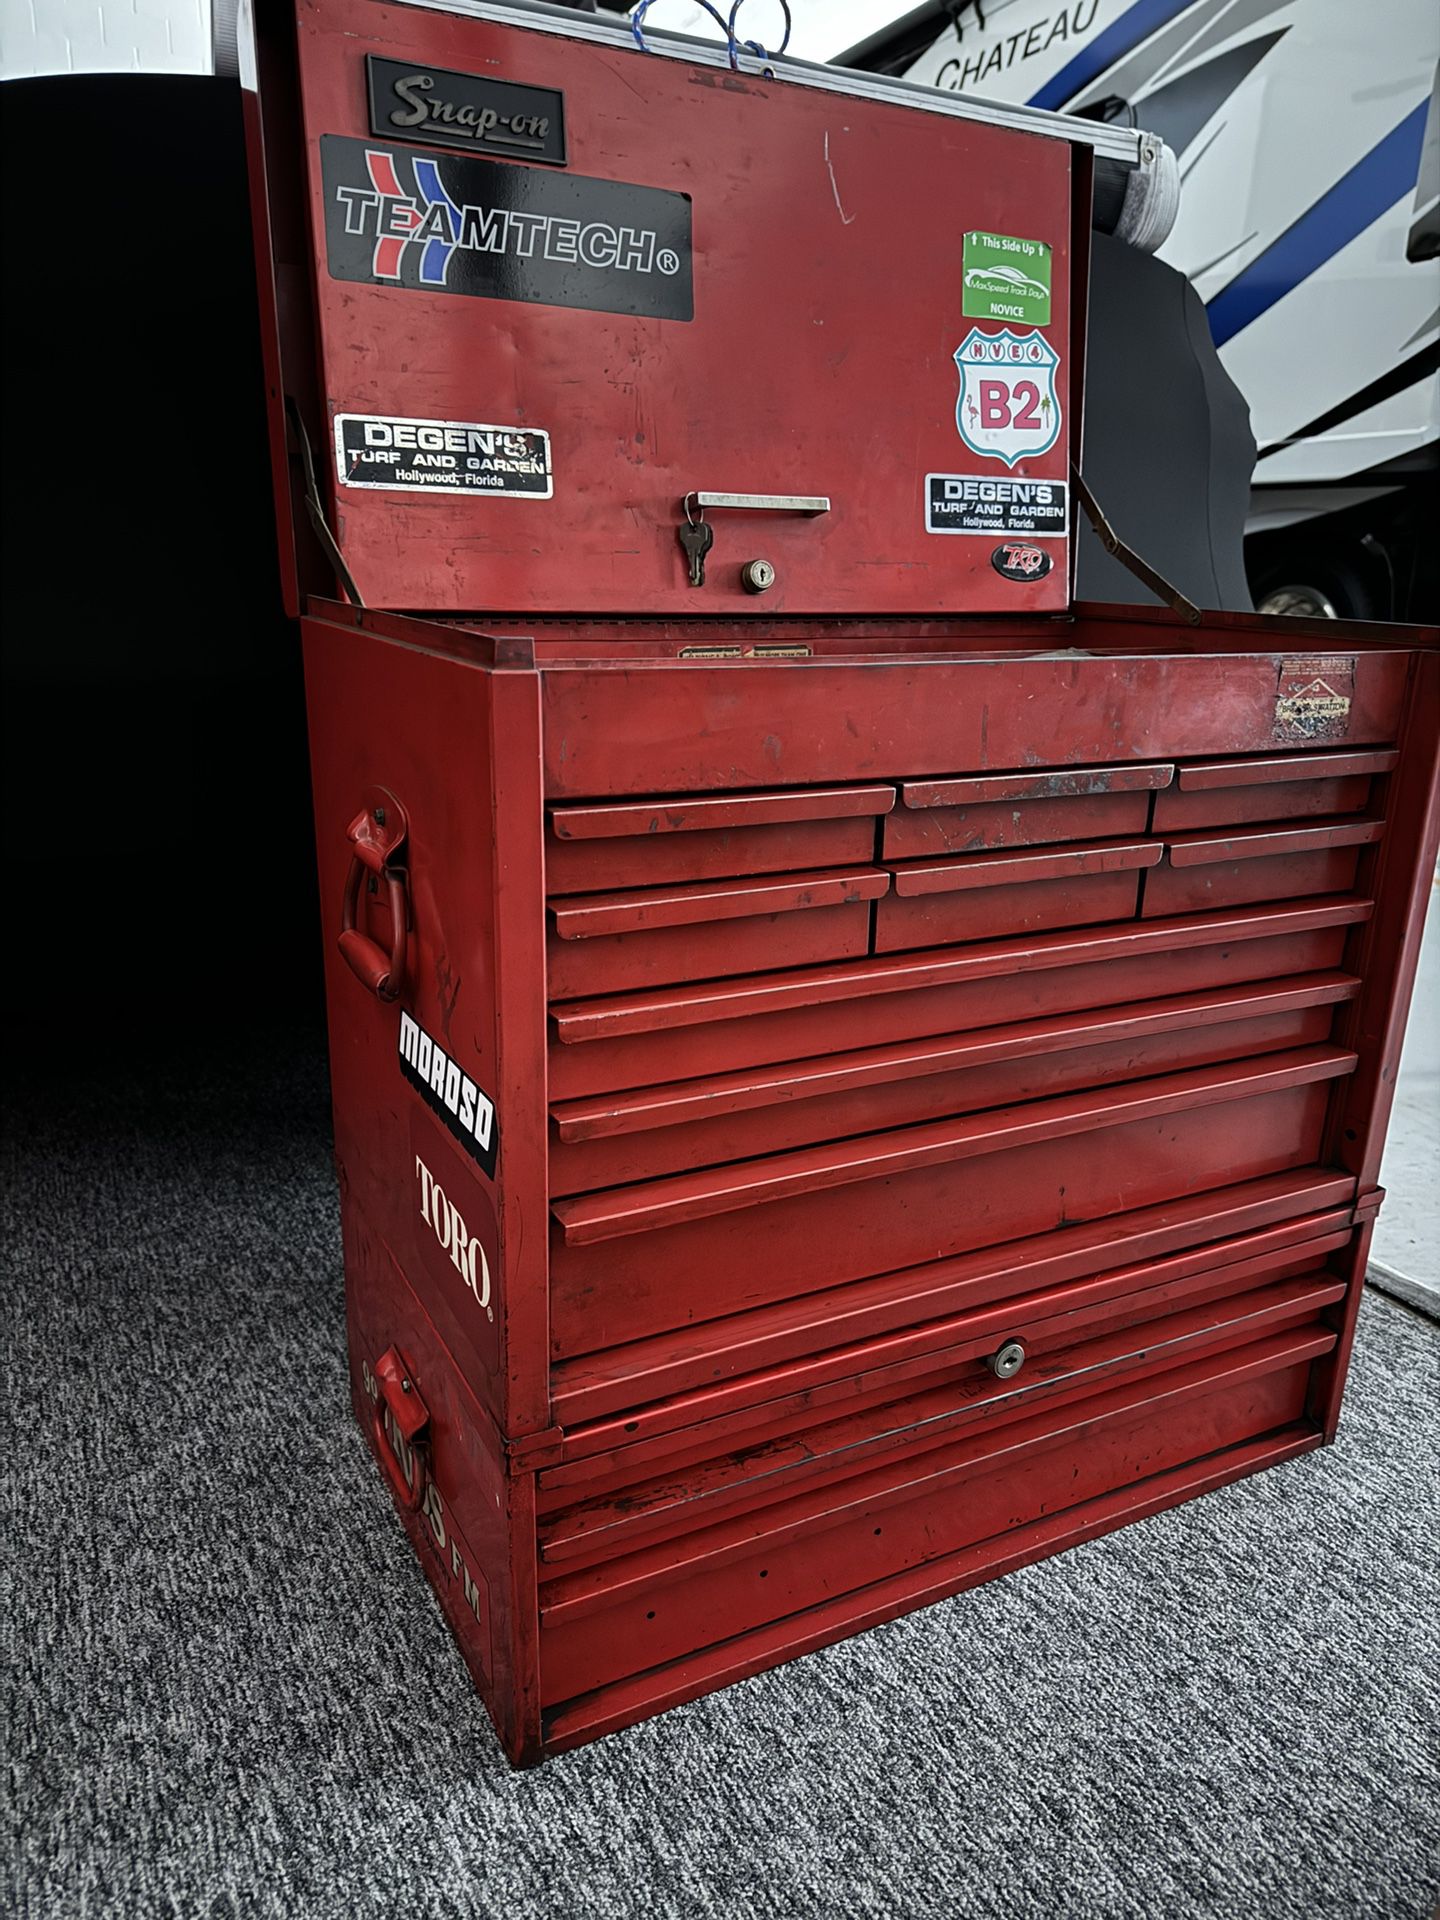 Snap On Took Box And Bottom Drawers